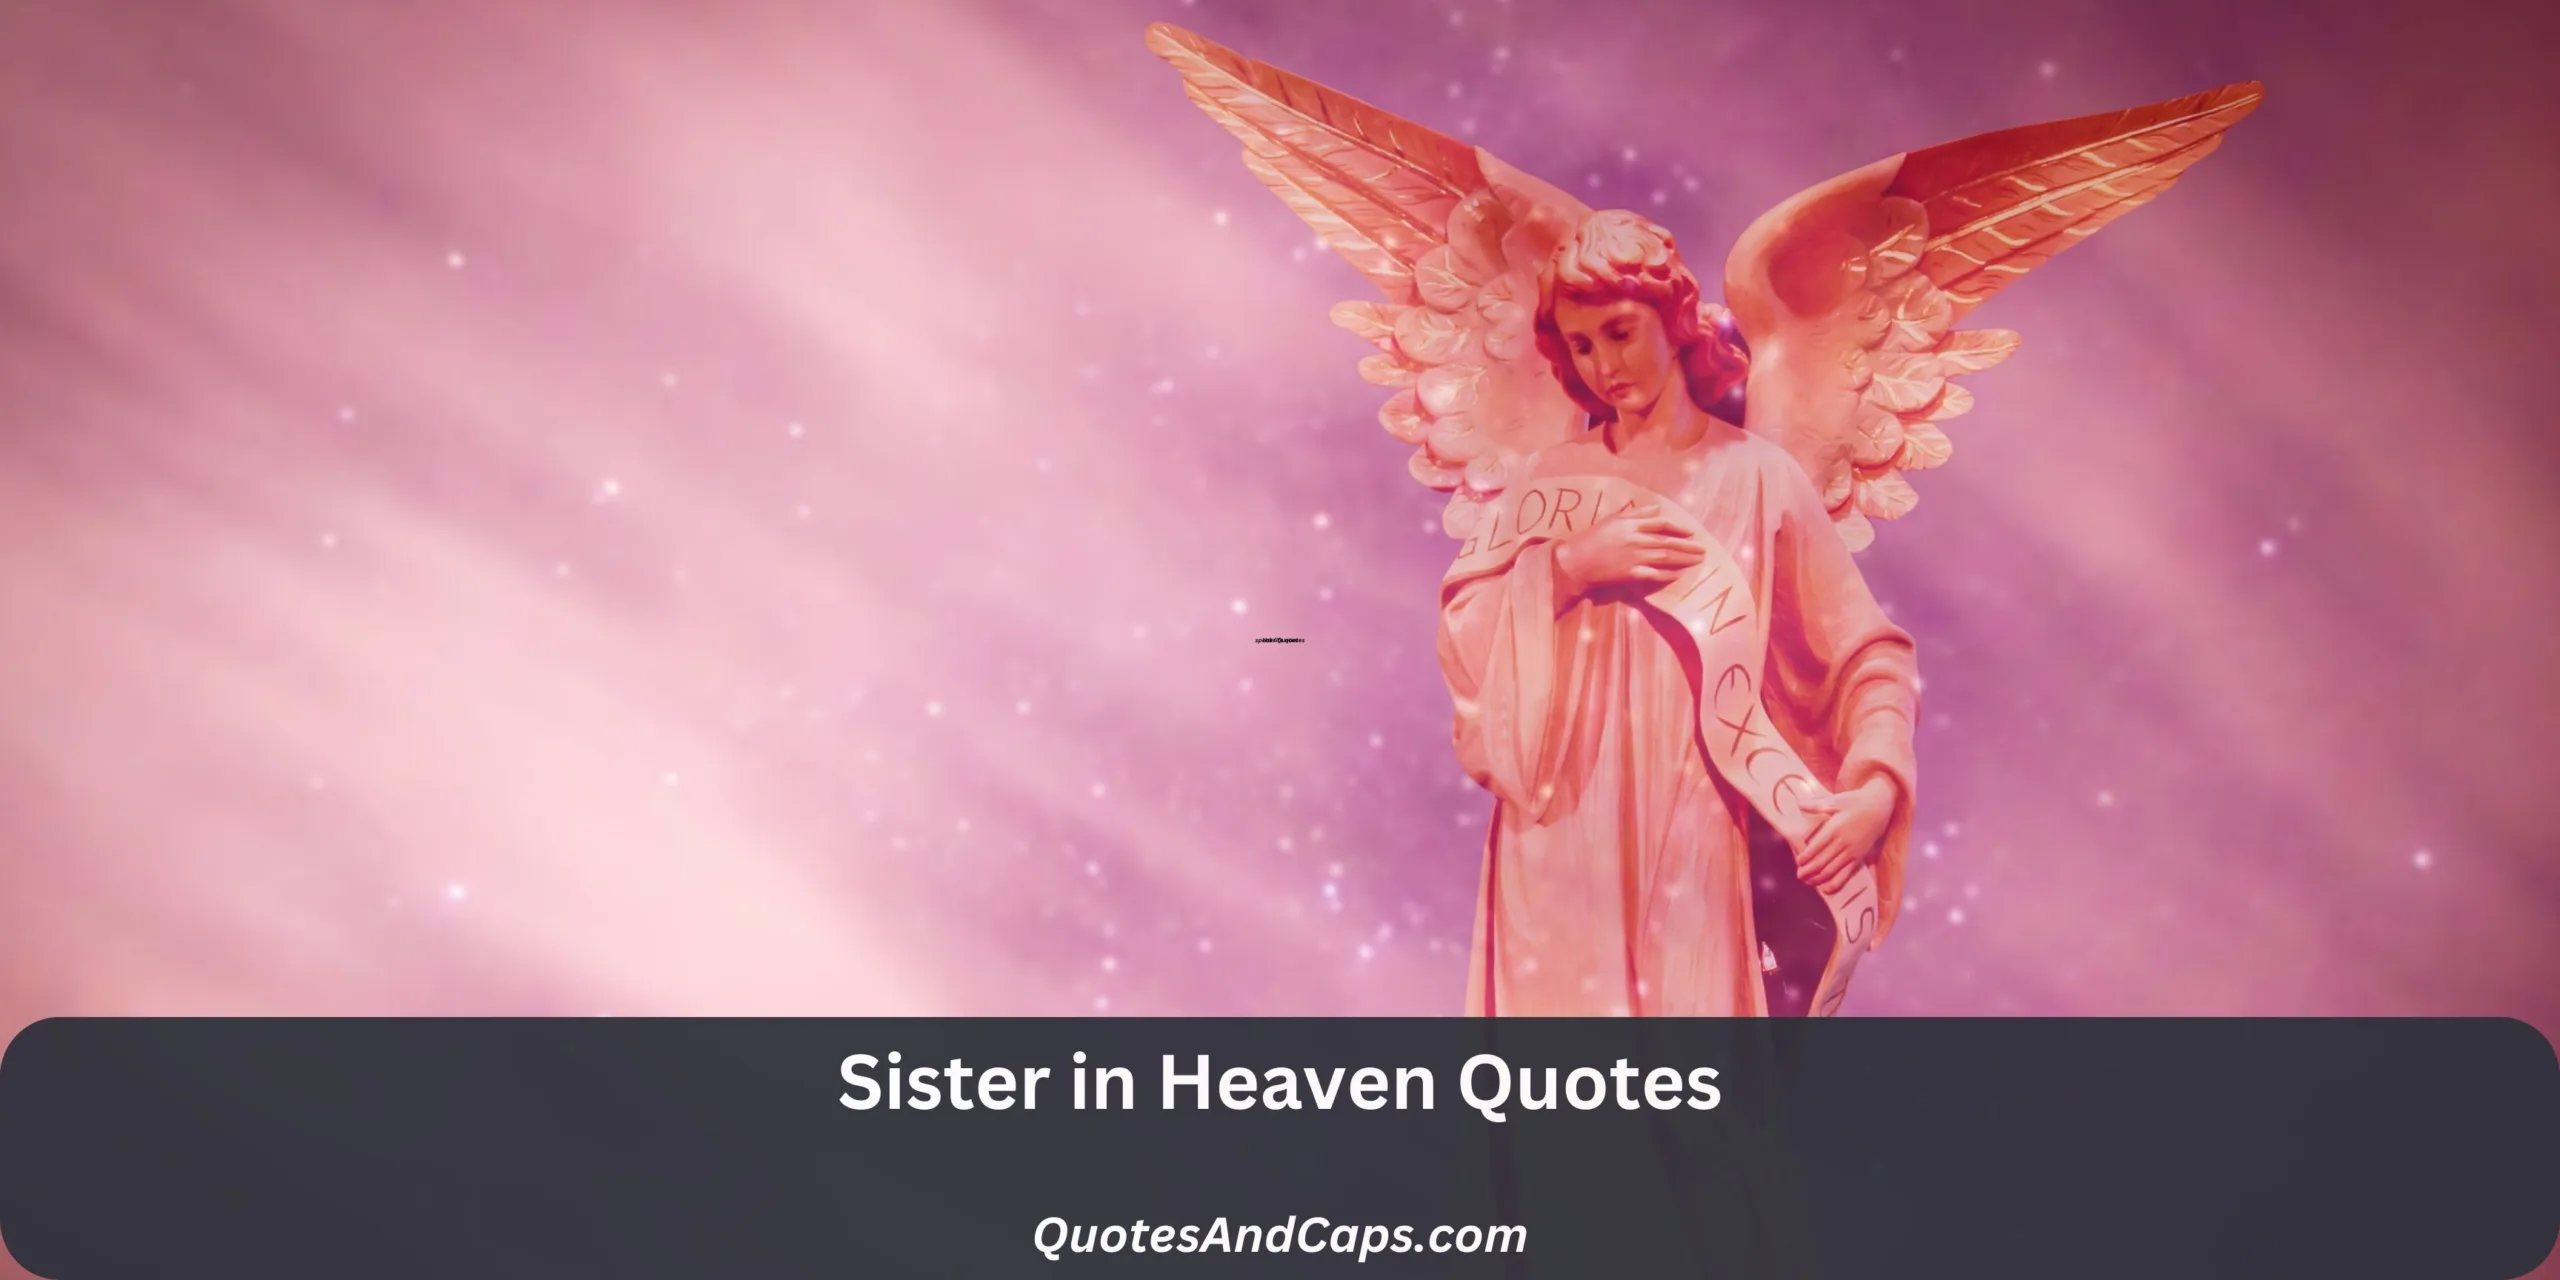 Sister in Heaven Quotes